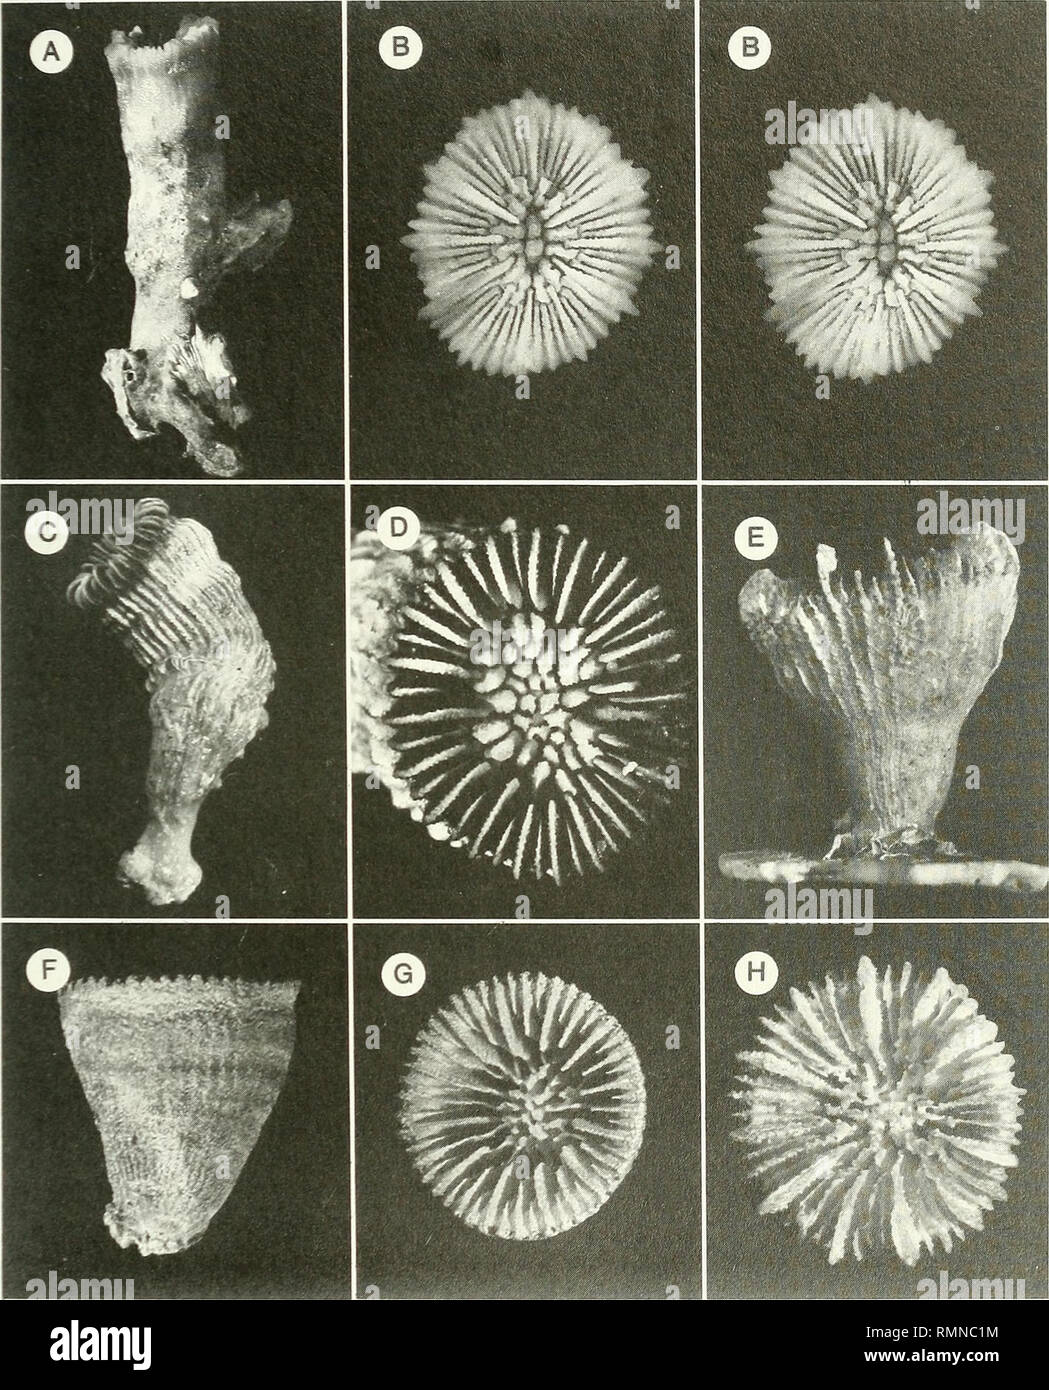 . Annals of the South African Museum = Annale van die Suid-Afrikaanse Museum. Natural history. AZOOXANTHELLATE SCLERACTINIA FROM THE SOUTH-WEST INDIAN OCEAN 239. Fig. 4. A-B. Caryophyllia elongata sp. nov., V-2716 (holotype), lateral and stereo calicular views. Ax 1,6, Bx3,9. C-D. Trochocyathus sp. A, V-2662, IOM, lateral and calicular views. Cxl,7, D x 4,5. E, H. Trochocyathus sp. cf. T. rawsonii, V-2733, USNM 91568, lateral and calicular views. E x 3,6, H x 3,3. F-G. Conotrochus brunneus, AB-365D, USNM 91556, lateral and calicular views. Fx3,5, Gx3,9.. Please note that these images are extra Stock Photo